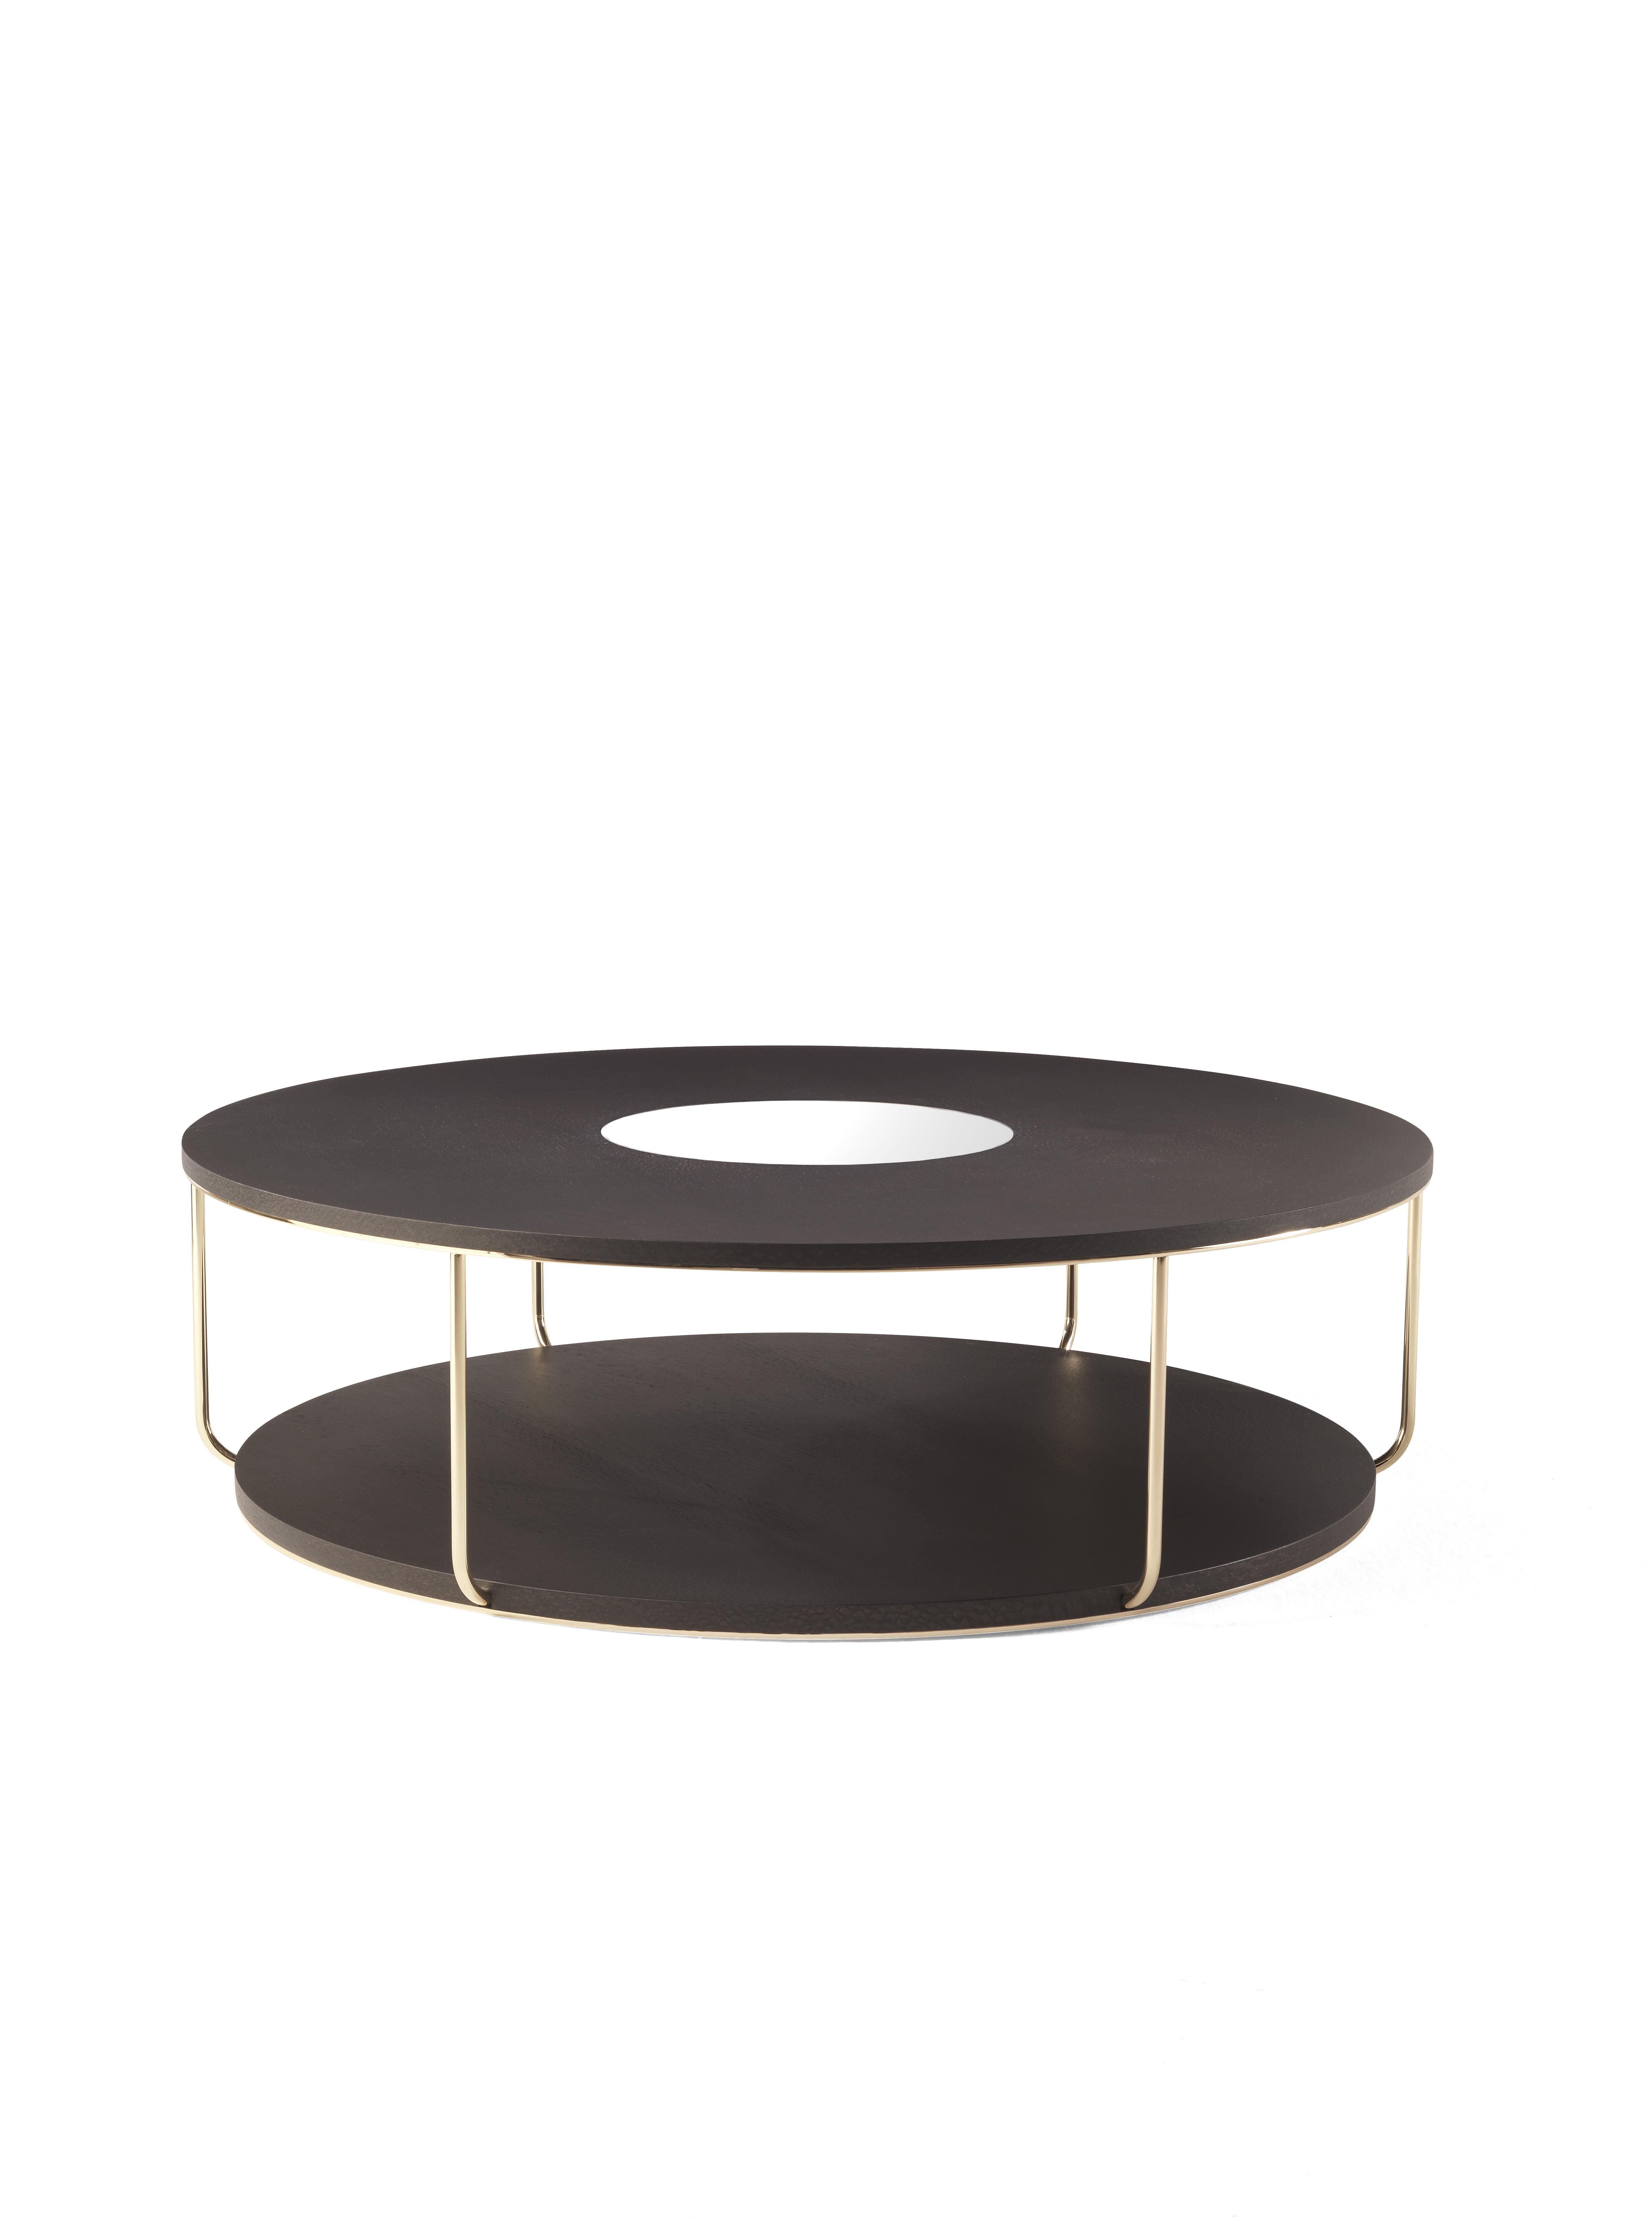 Ethnic accents and African references for the Ambar coffee table, whose structure consisting of base and top in precious Carbalho wood evokes the typical African percussion.
The decorative mirror in the center of the top adds a luminous note, as